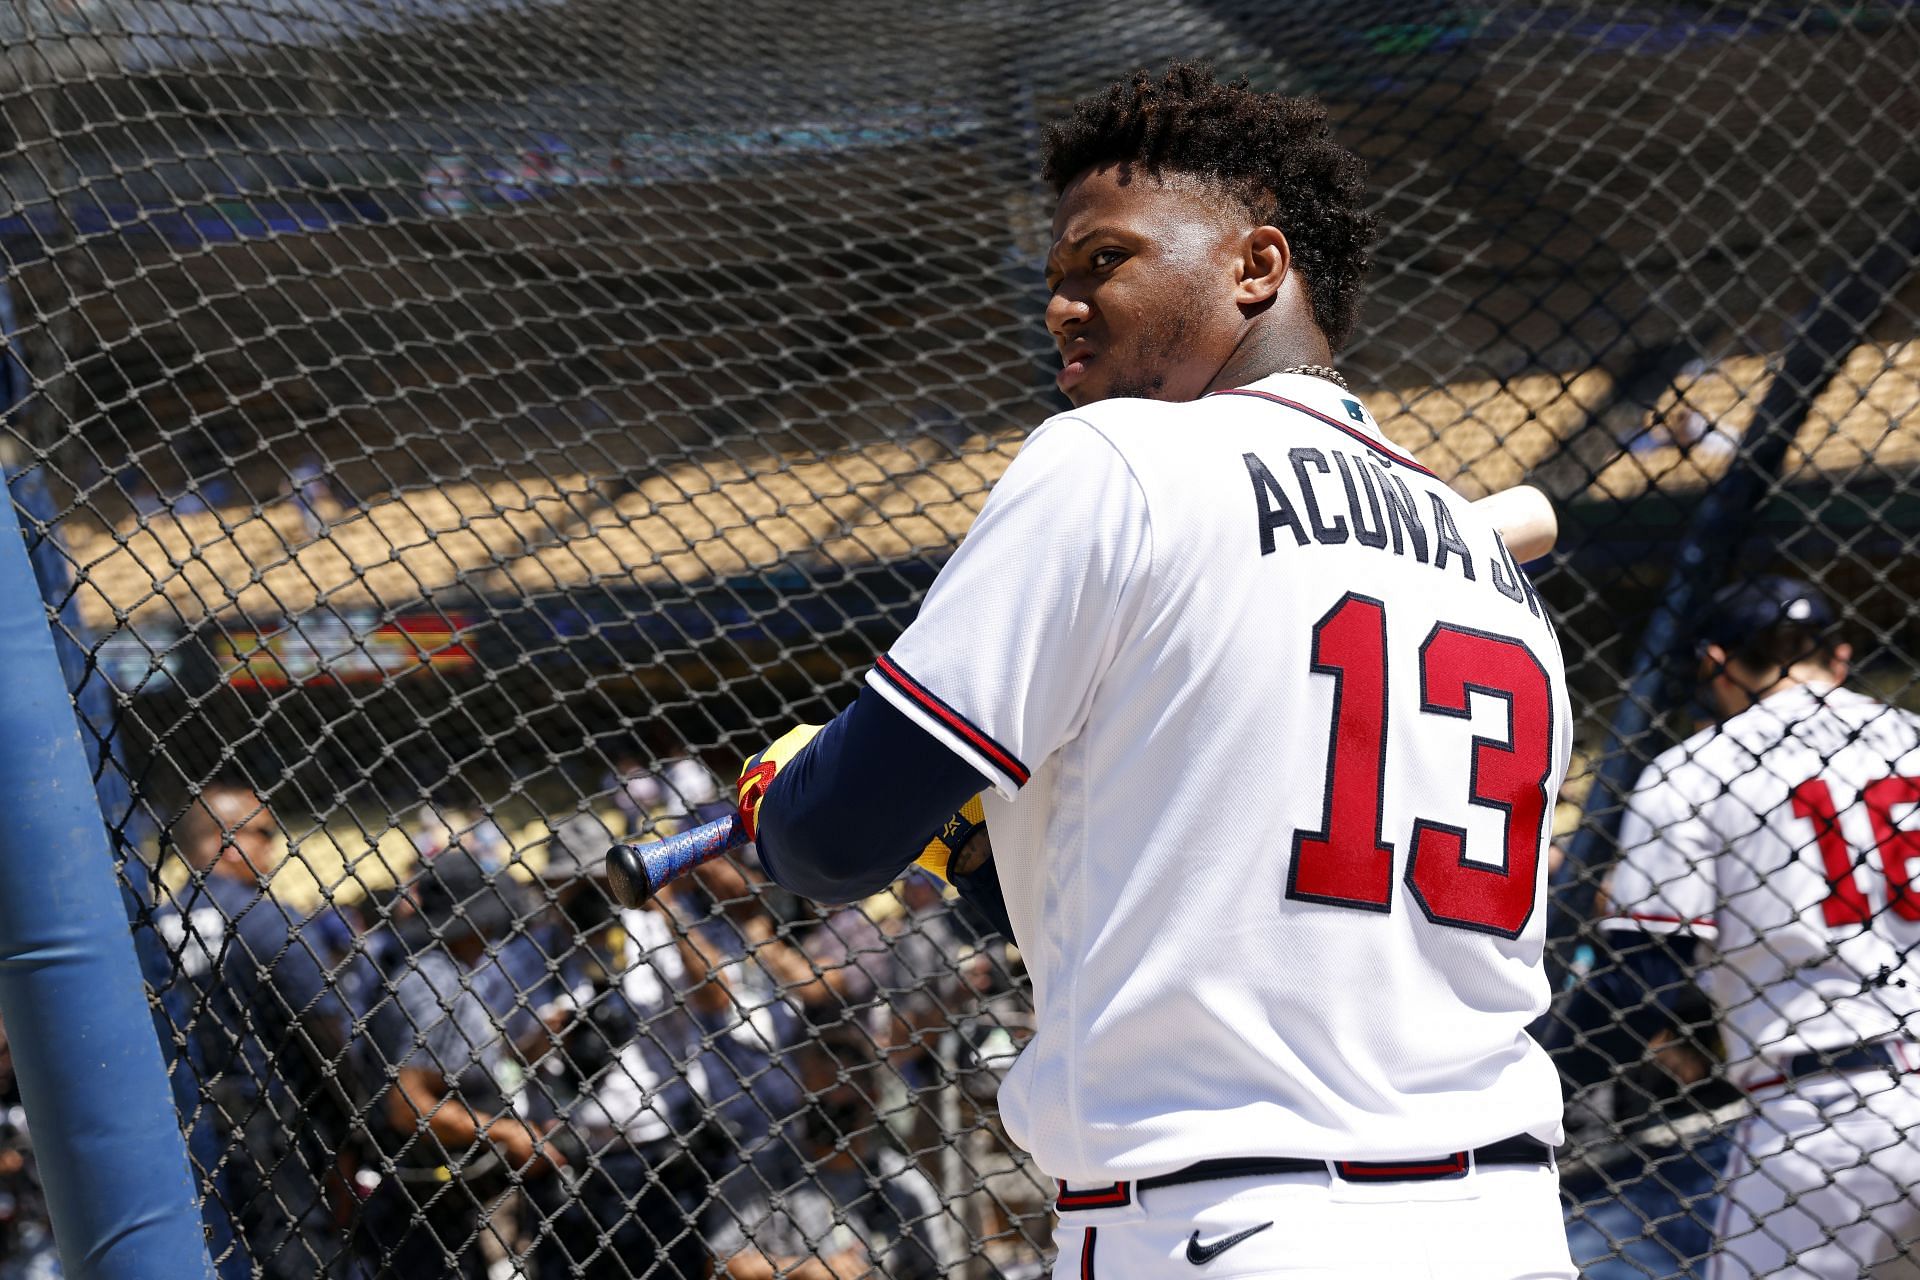 Acuna during the 2022 Gatorade All-Star Workout Day at Dodger Stadium